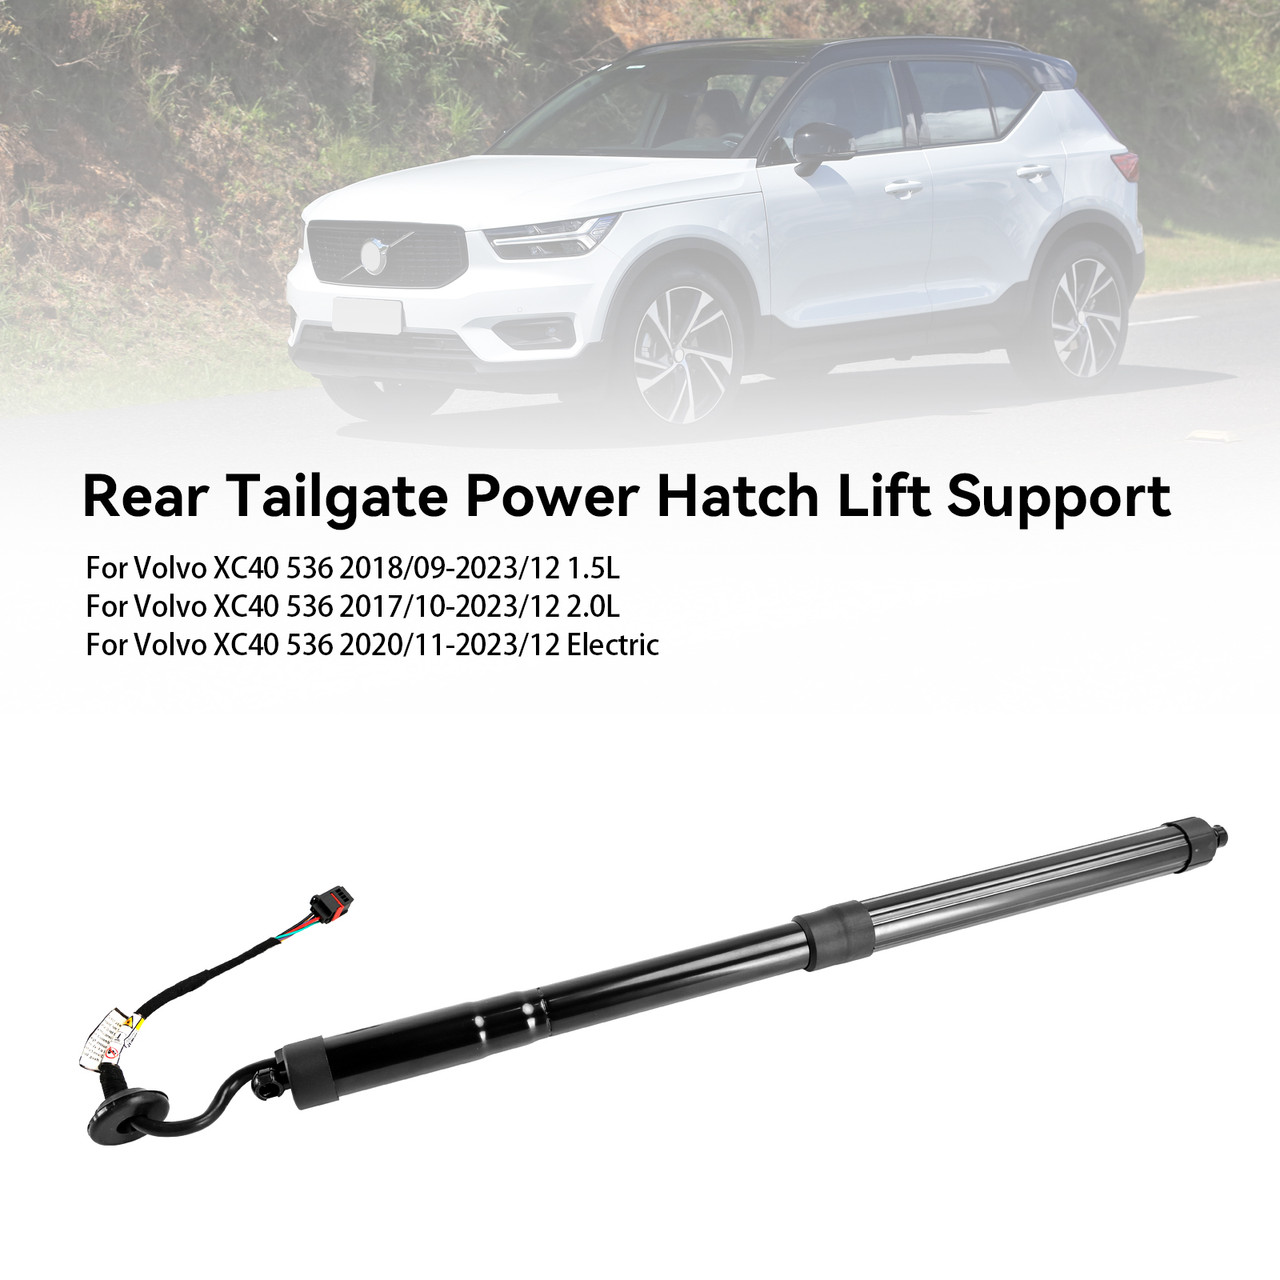 2018/09-2023/12 Volvo XC40 536 1.5L left Rear Tailgate Power Hatch Lift Support 32296296, 32357573, 32384408 black Generic